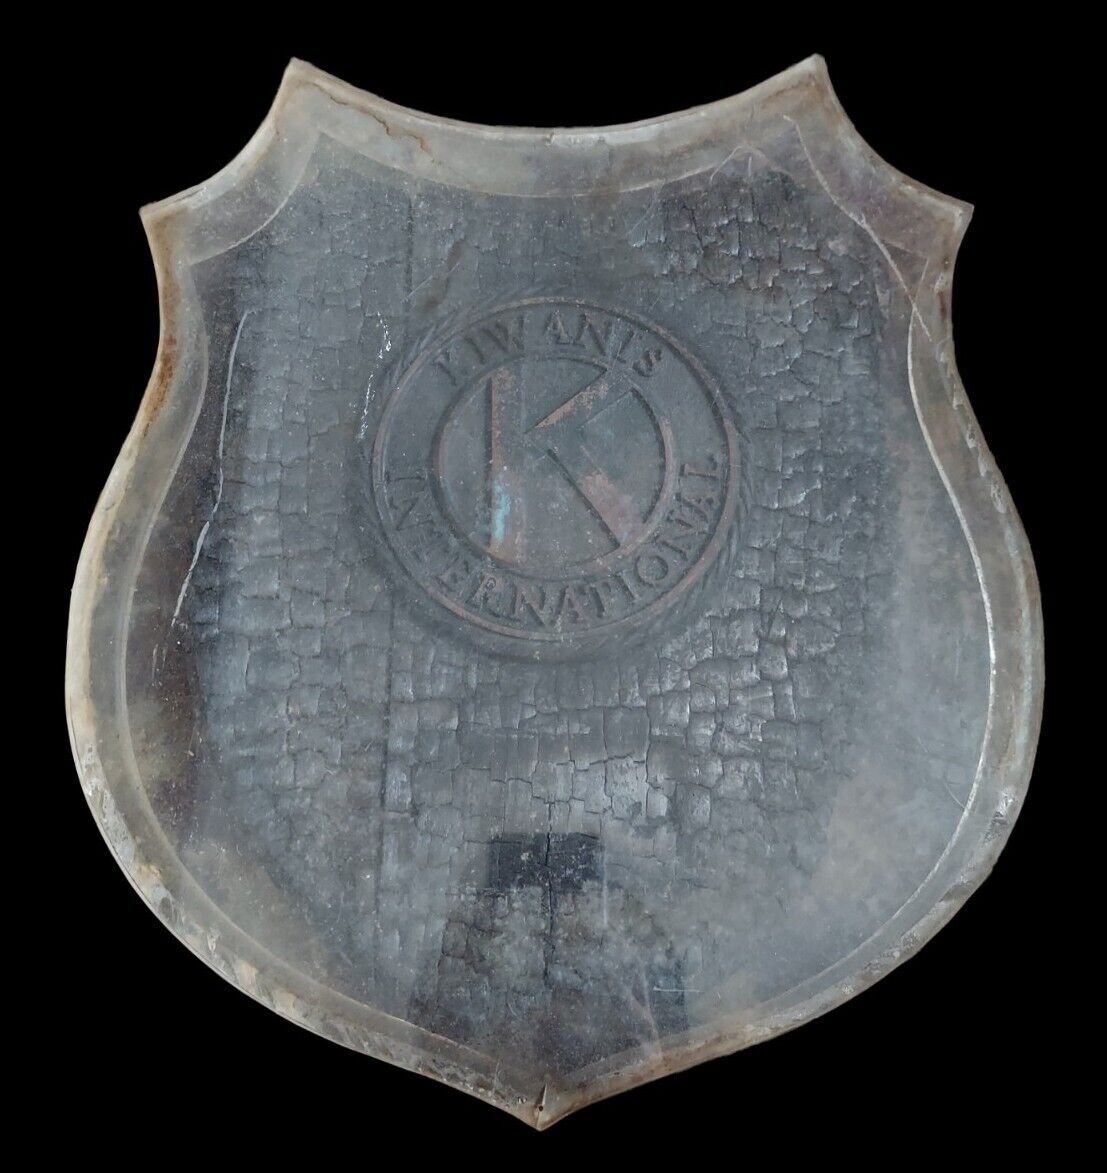 Kiwanis International Building Plaque burnt and preserved  in lucite case